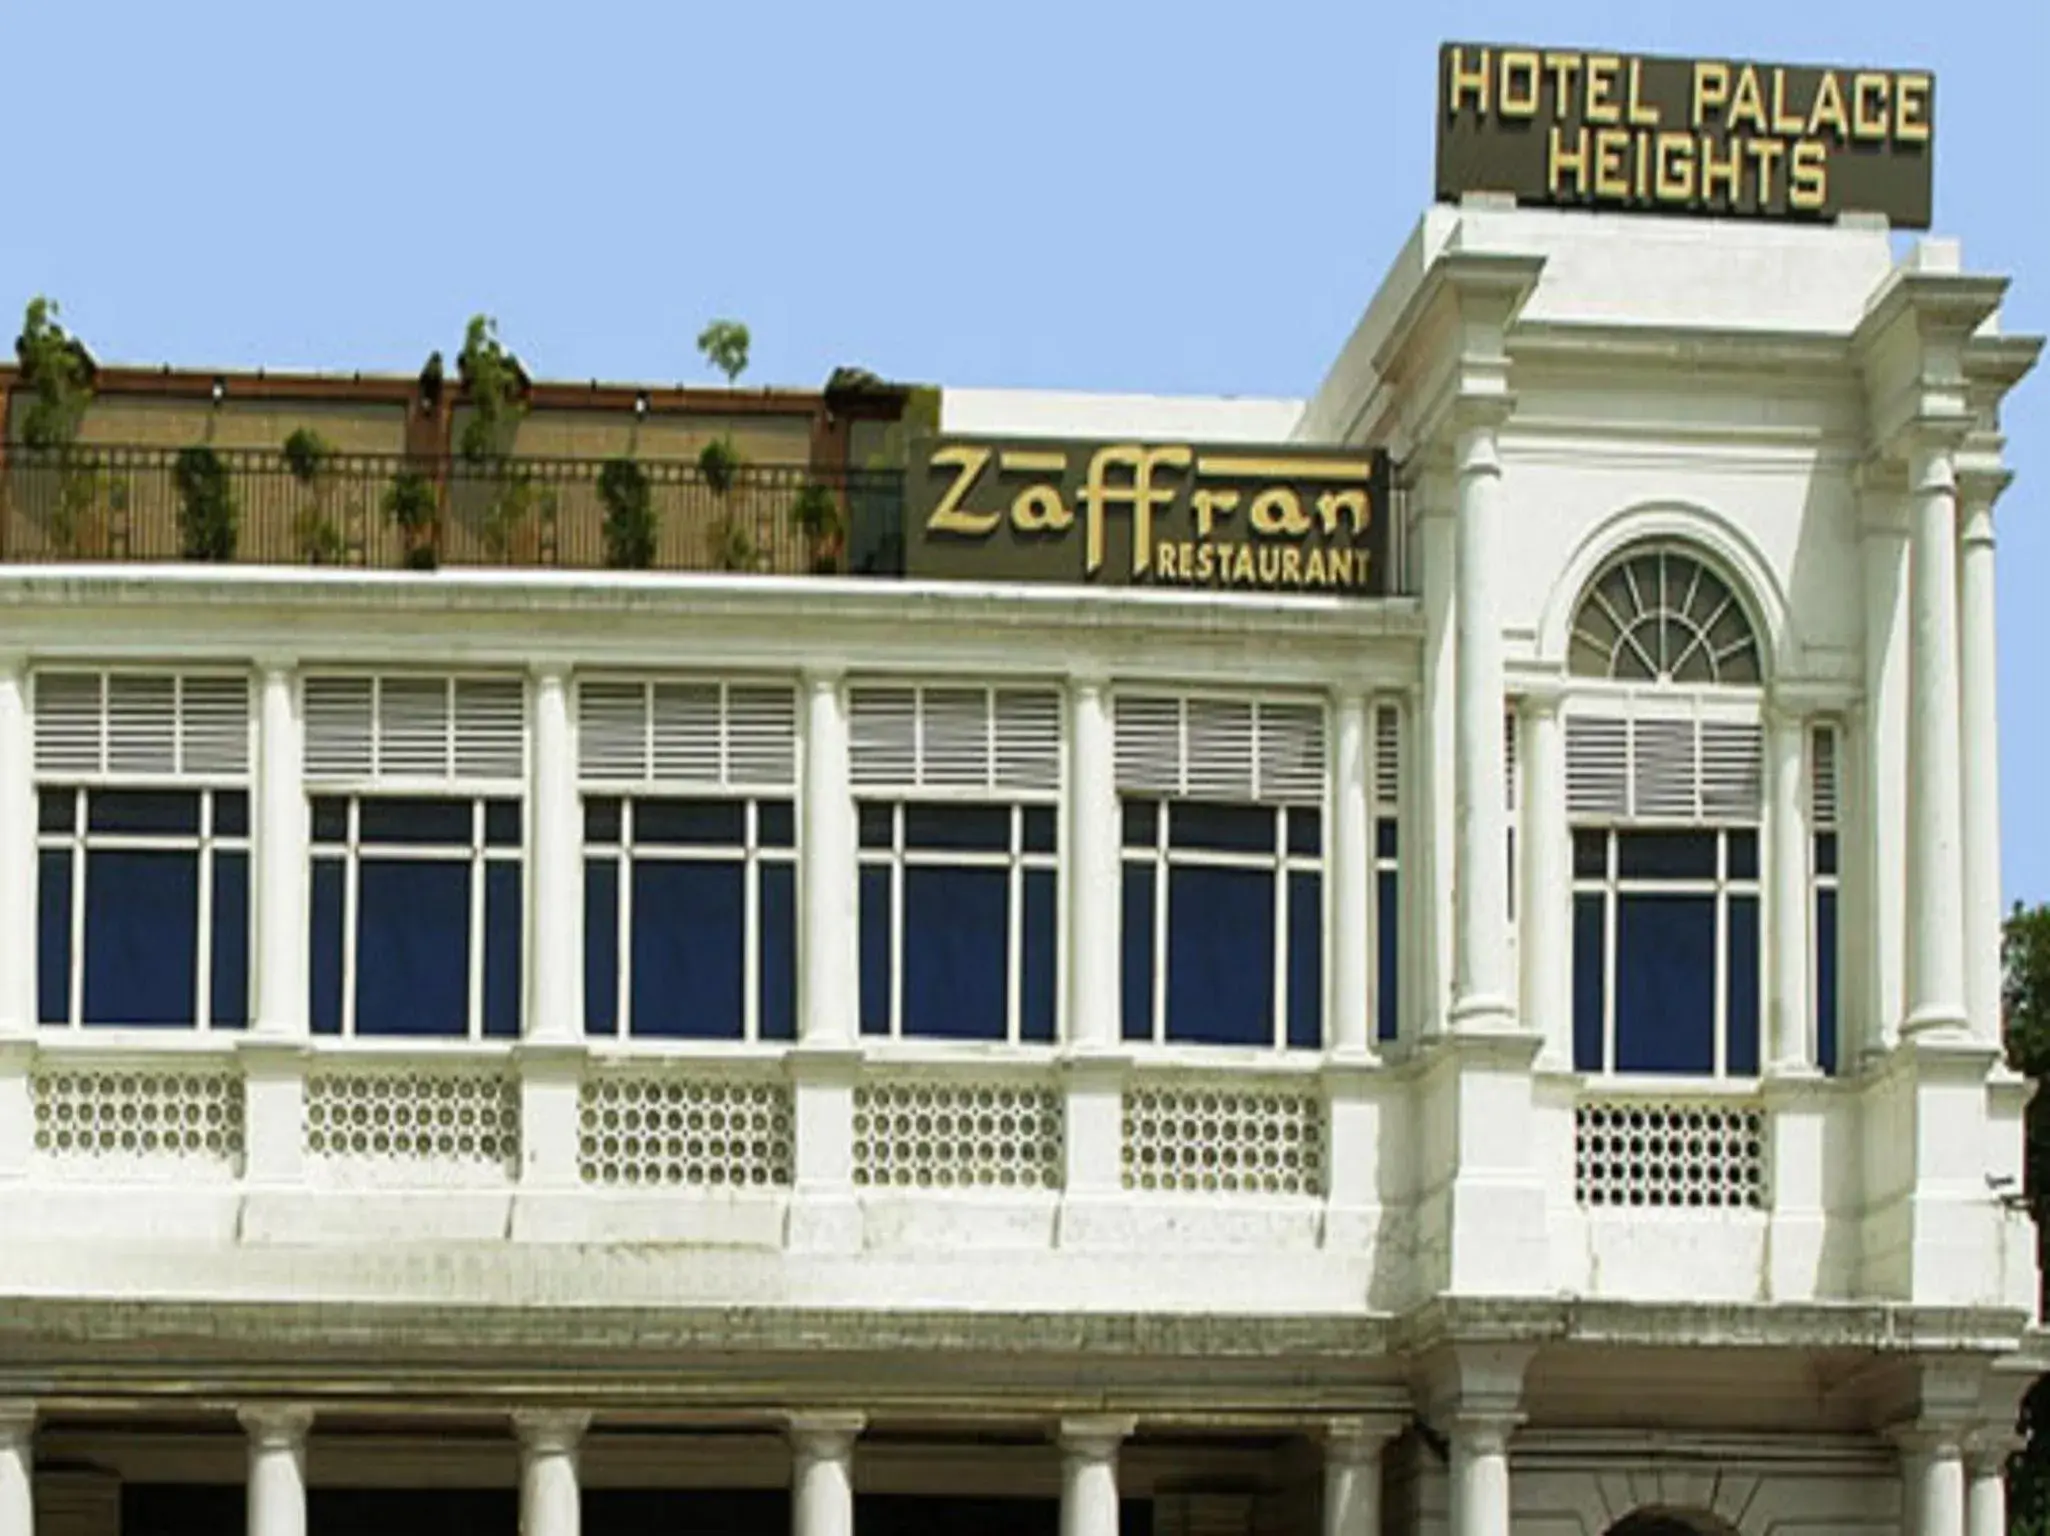 Facade/entrance in Hotel Palace Heights